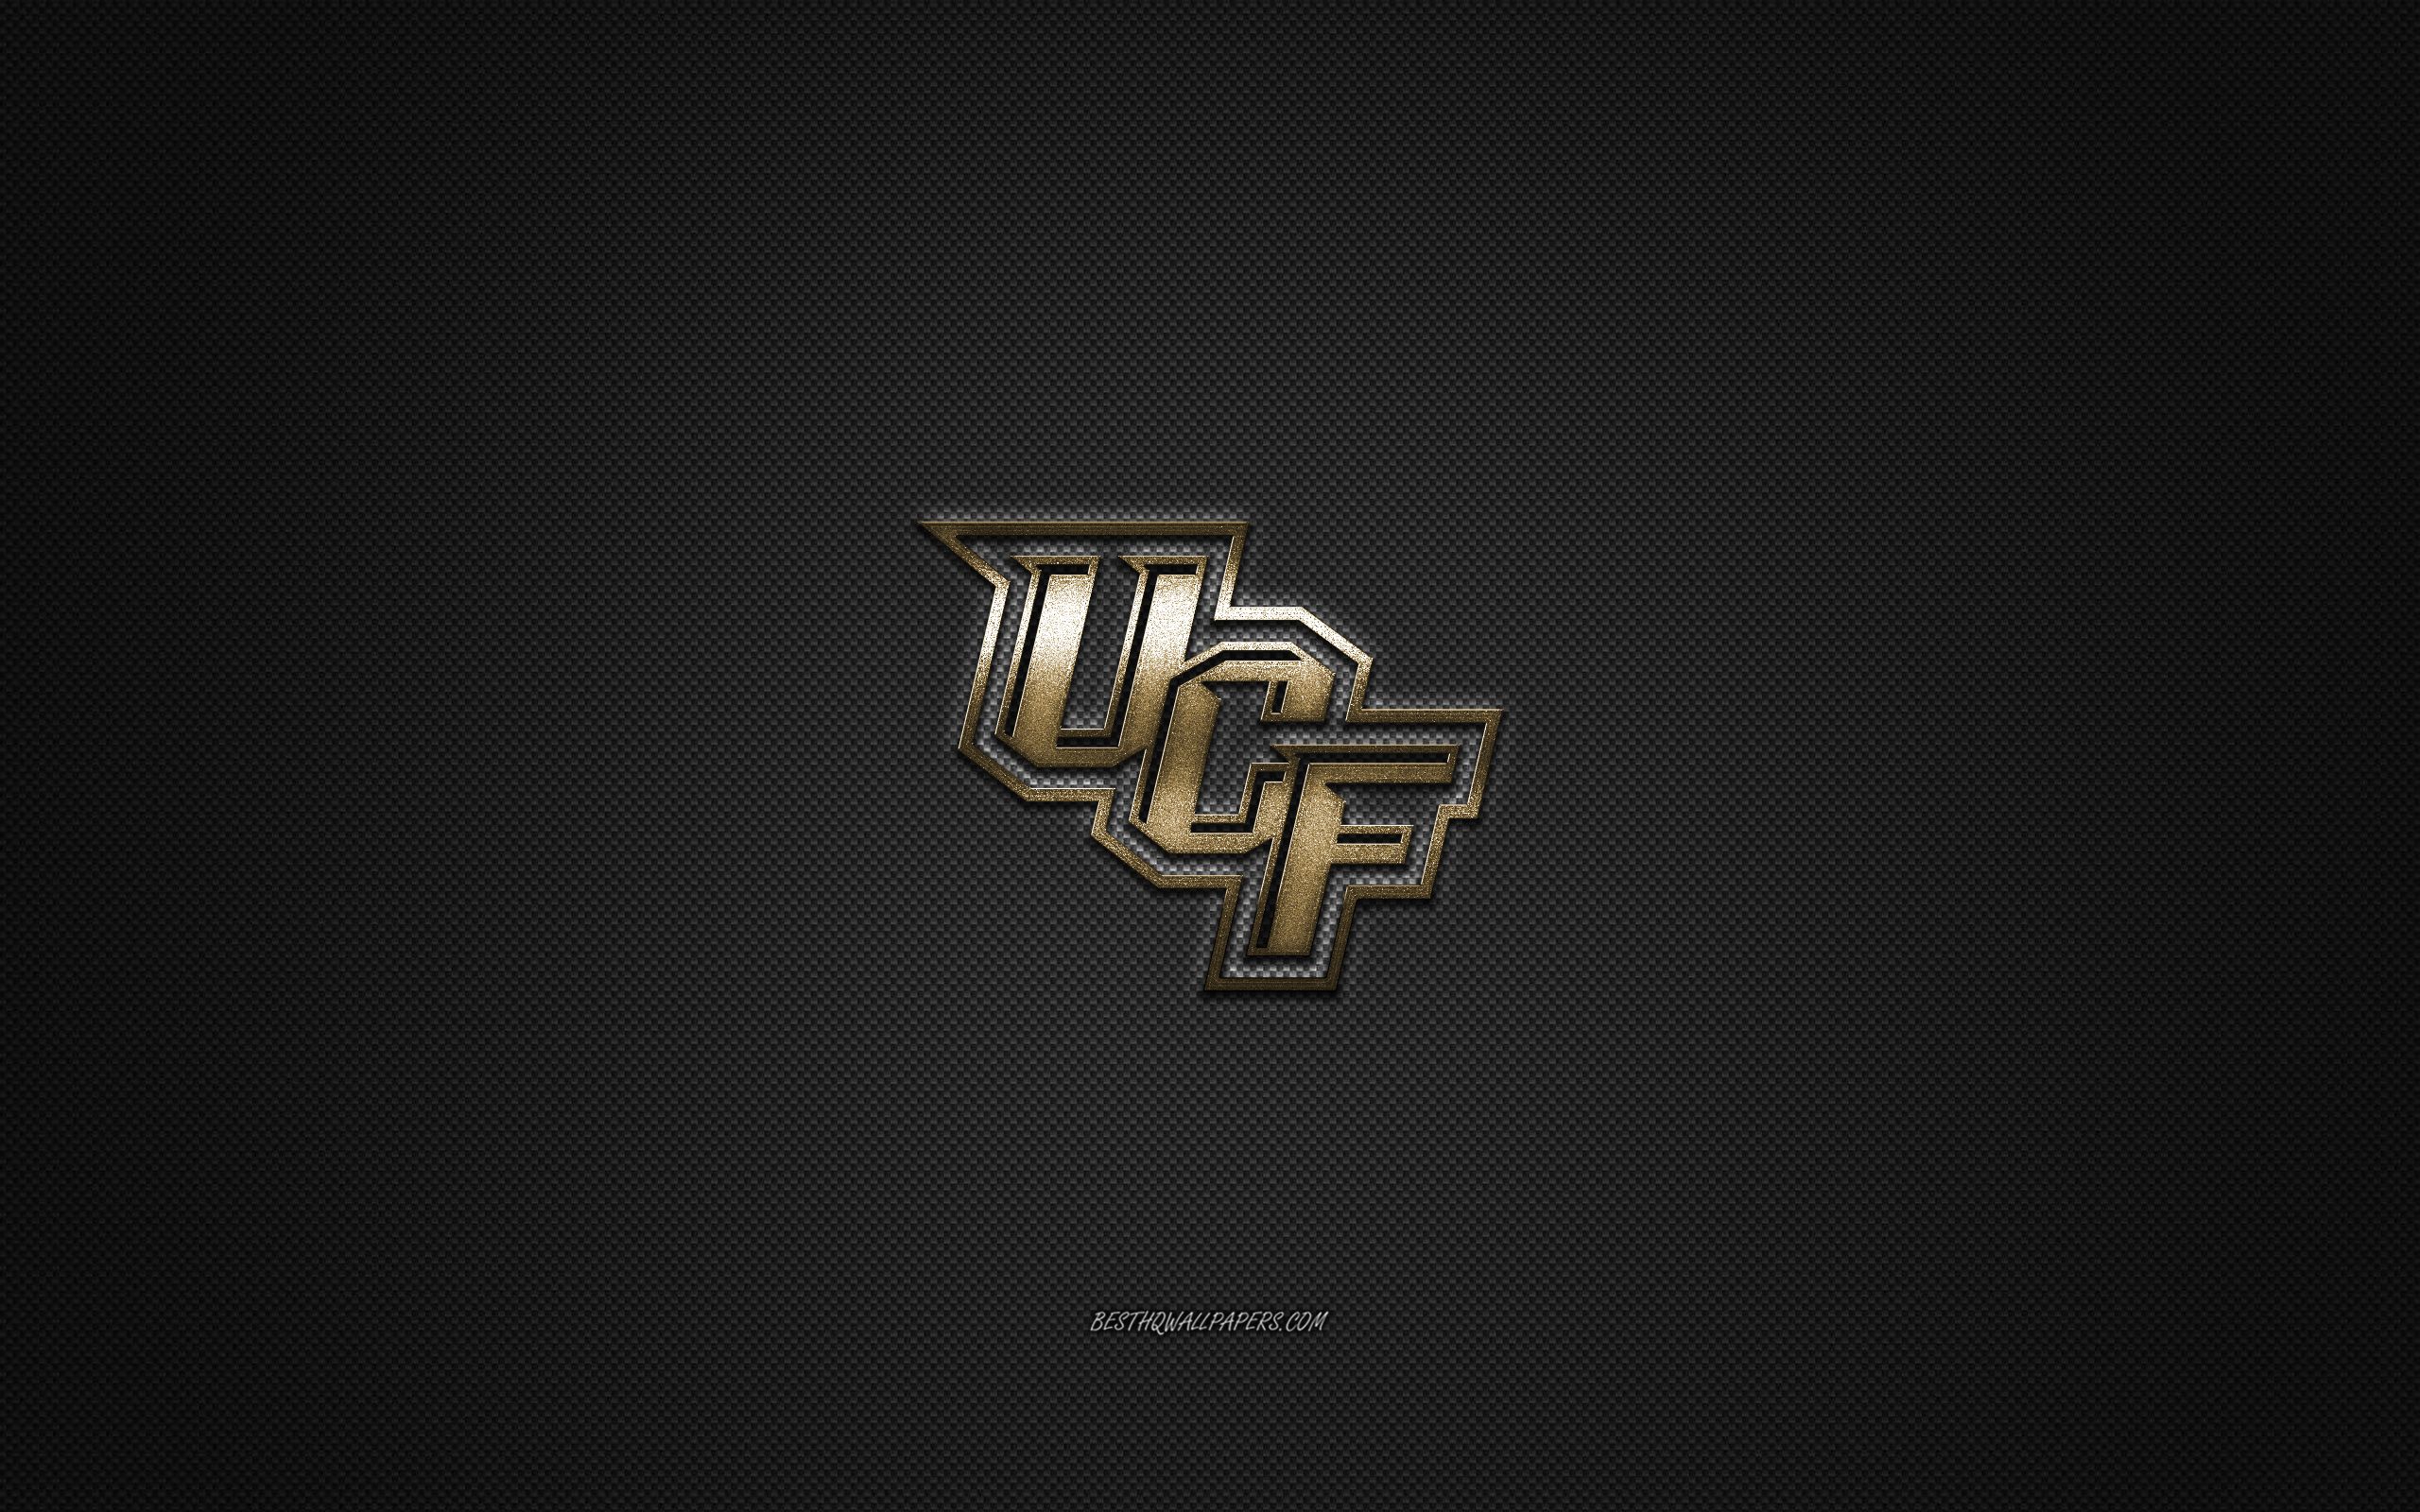 Download wallpaper UCF Knights logo, American football club, NCAA, golden logo, gray carbon fiber background, hockey, Orlando, Florida, USA, UCF Knights for desktop with resolution 2560x1600. High Quality HD picture wallpaper